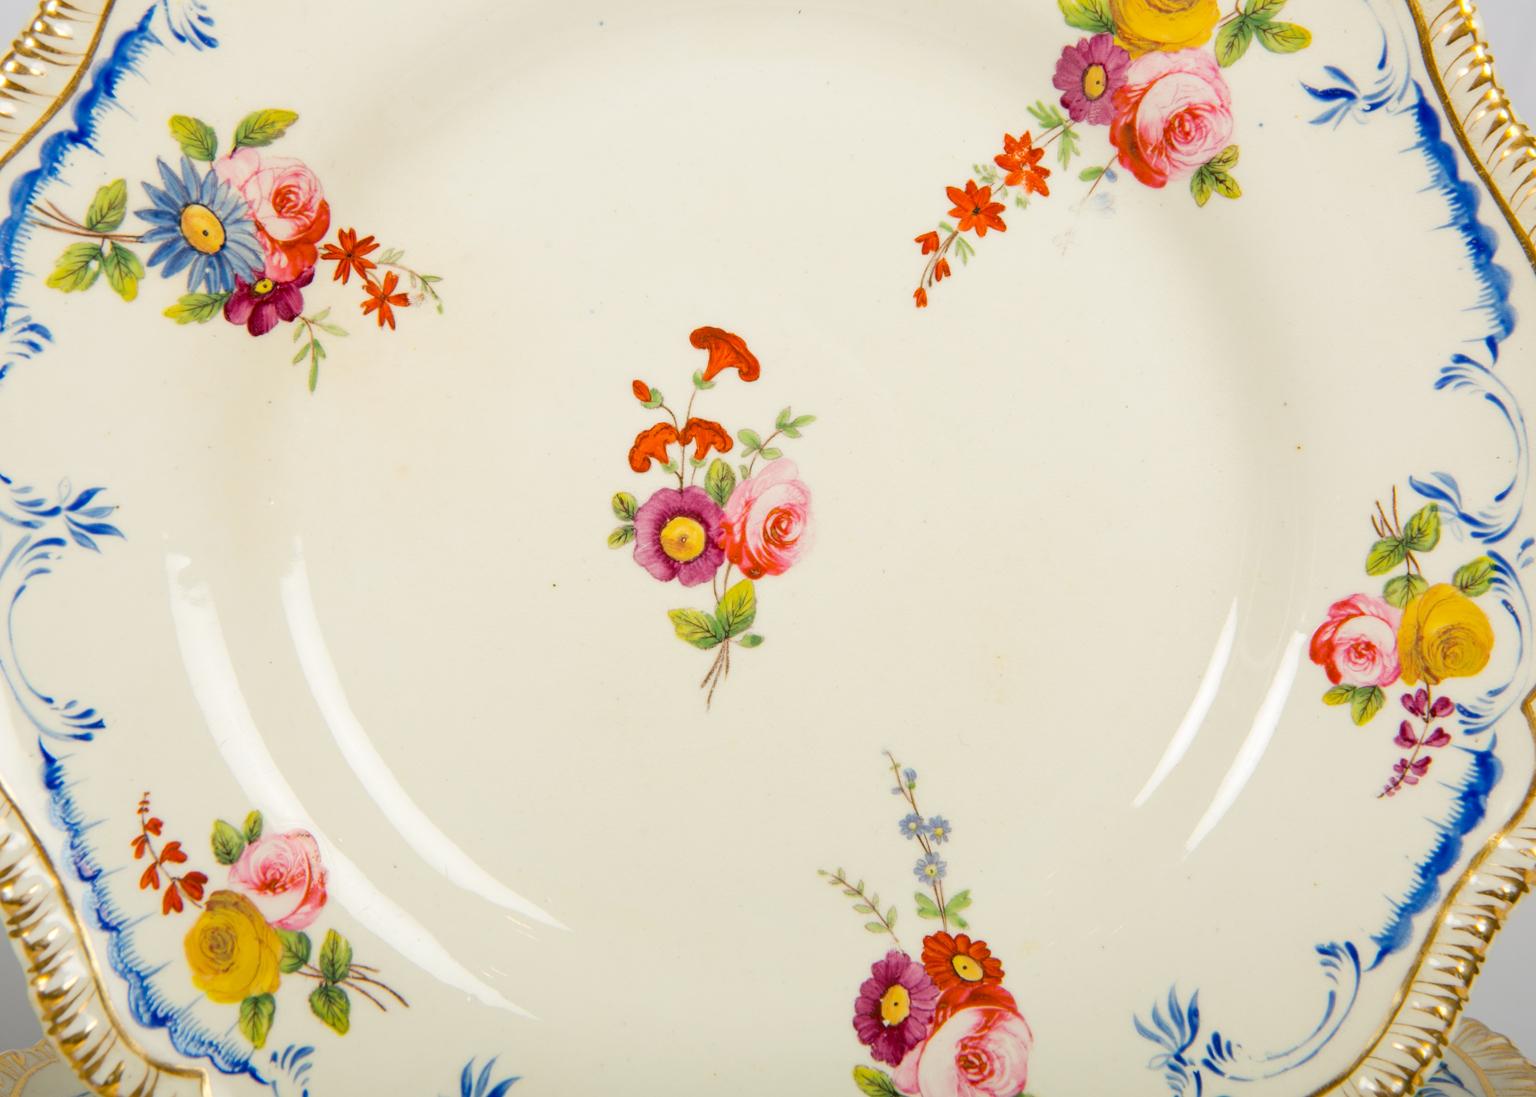 We are pleased to offer this set of four antique dinner plates made by Coalport n England circa 1820. We also have a set of four matching large soup bowls in the same pattern. See 1st Dibs Ref. # LU866511782251. The style of these plates shows a